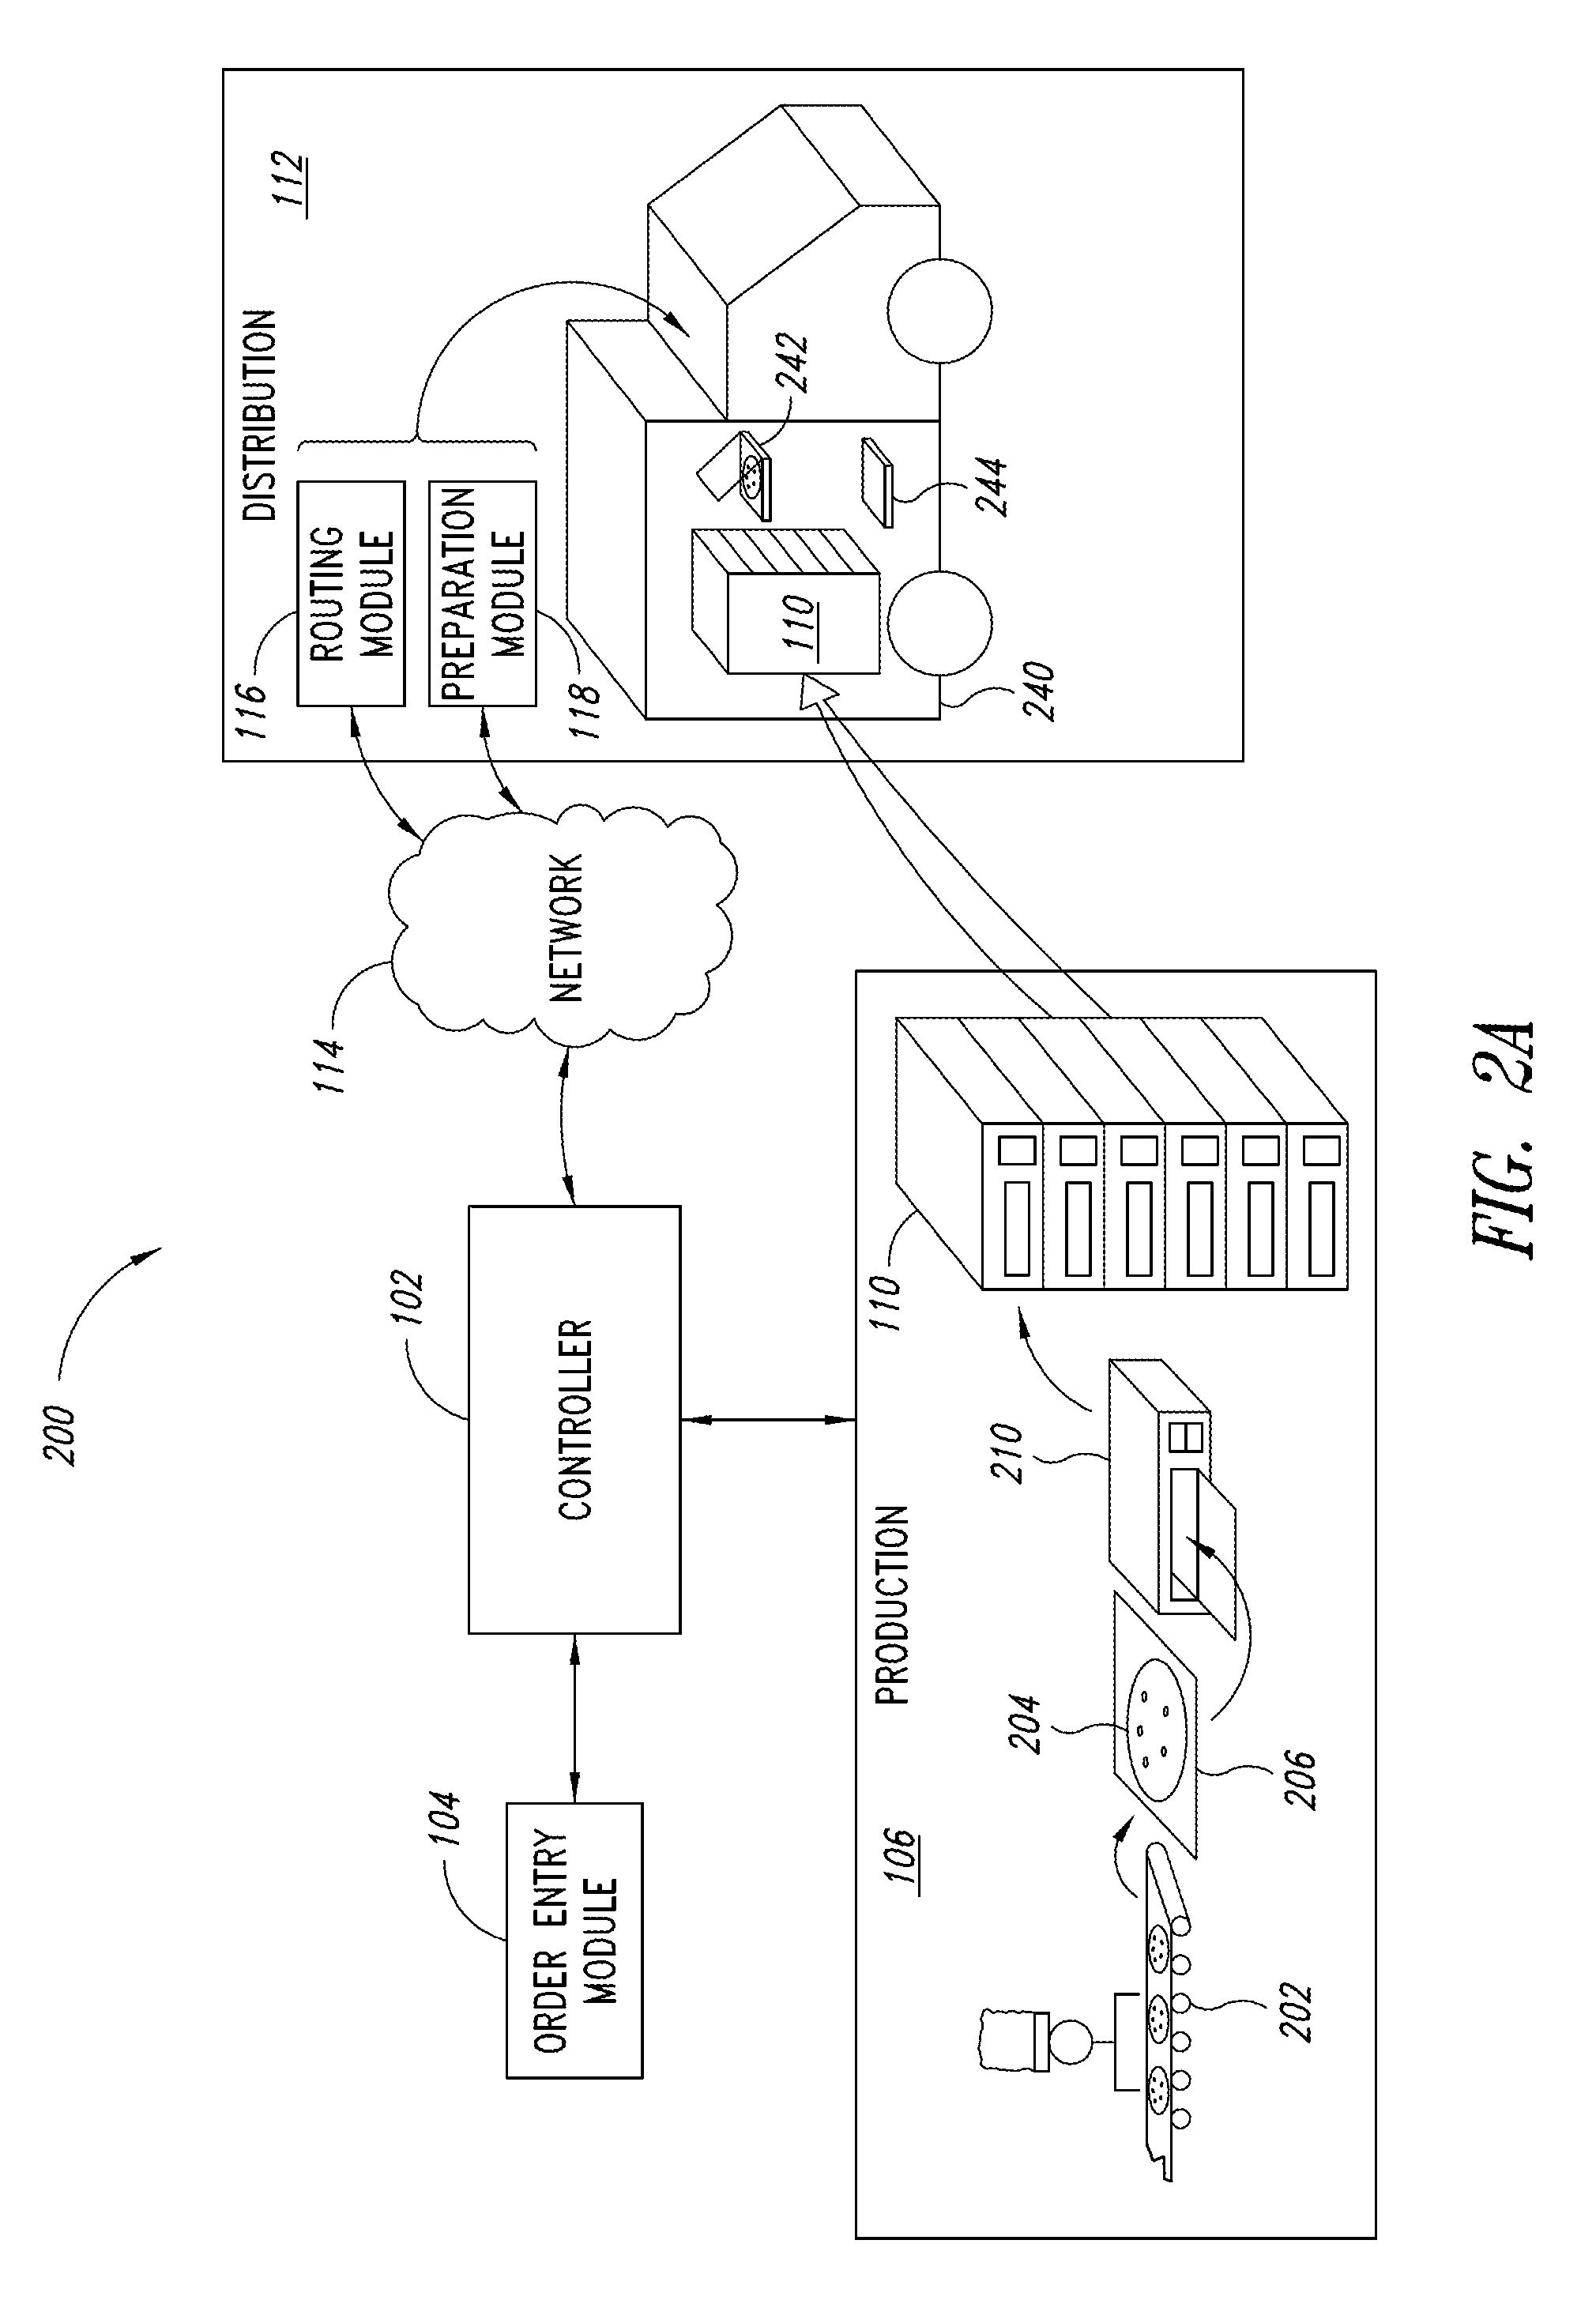 Systems and methods of preparing food products